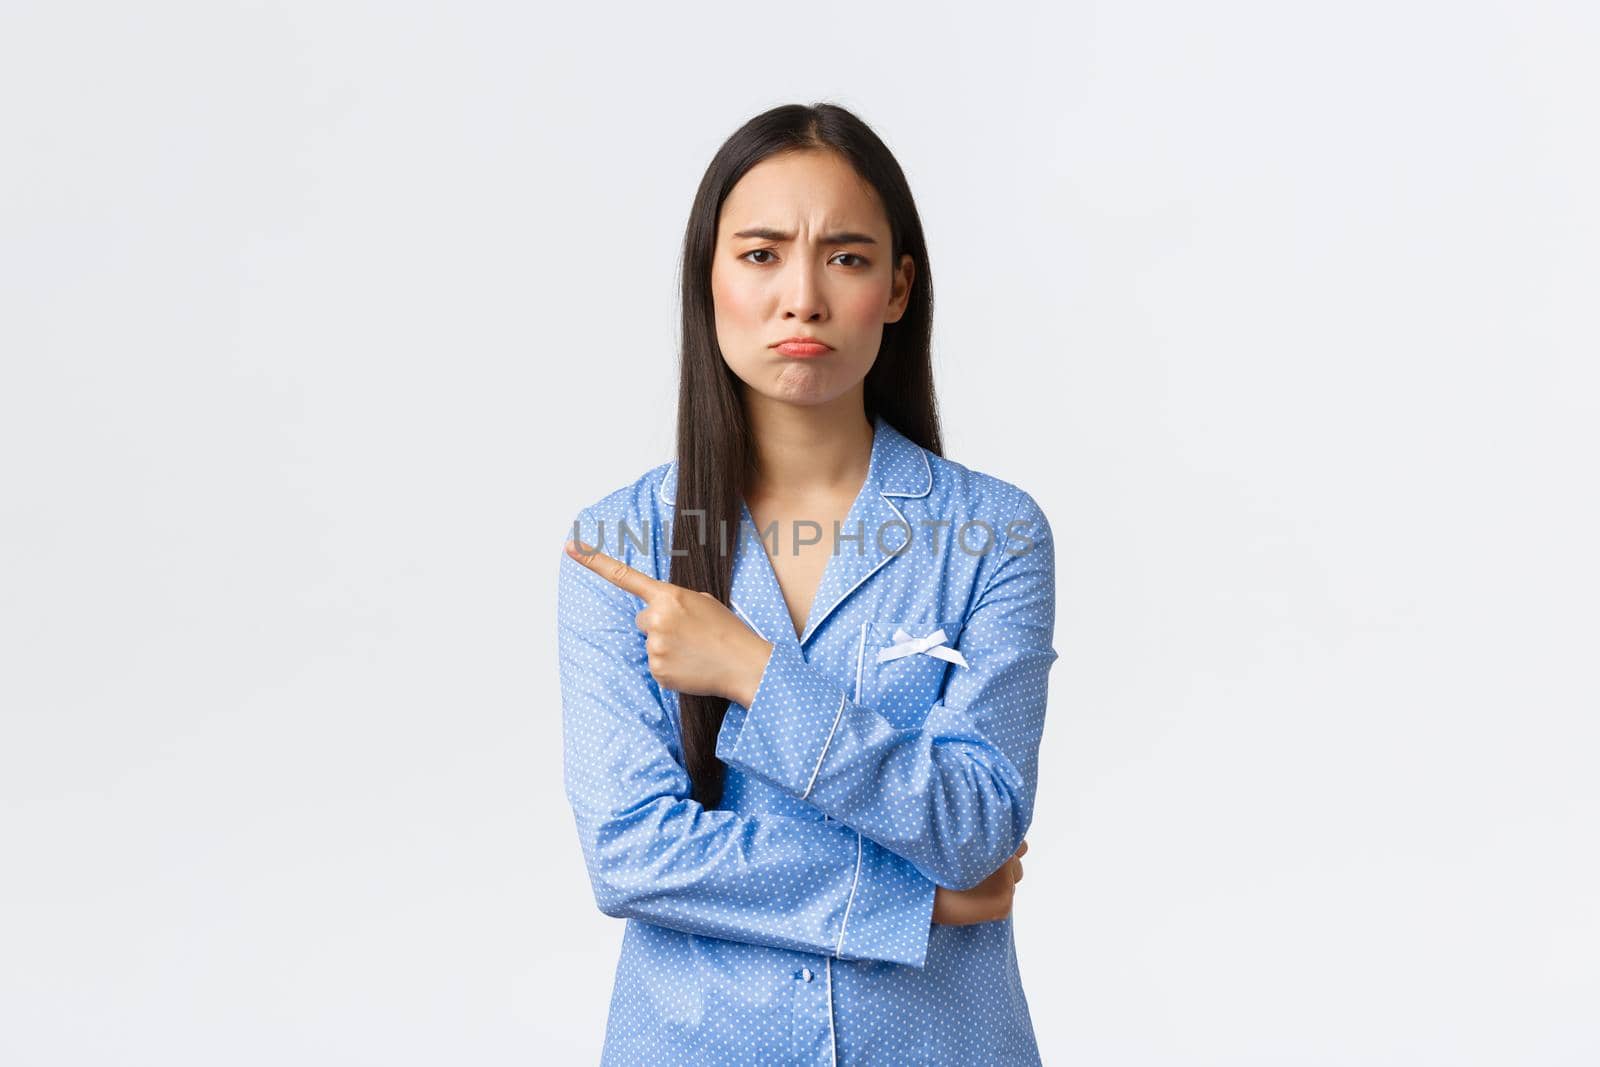 Upset gloomy asian girl in blue pajamas grimacing disappointed and sad, showing something bad, pointing finger left and pouting, complaining something unfair or saddening, standing white background.